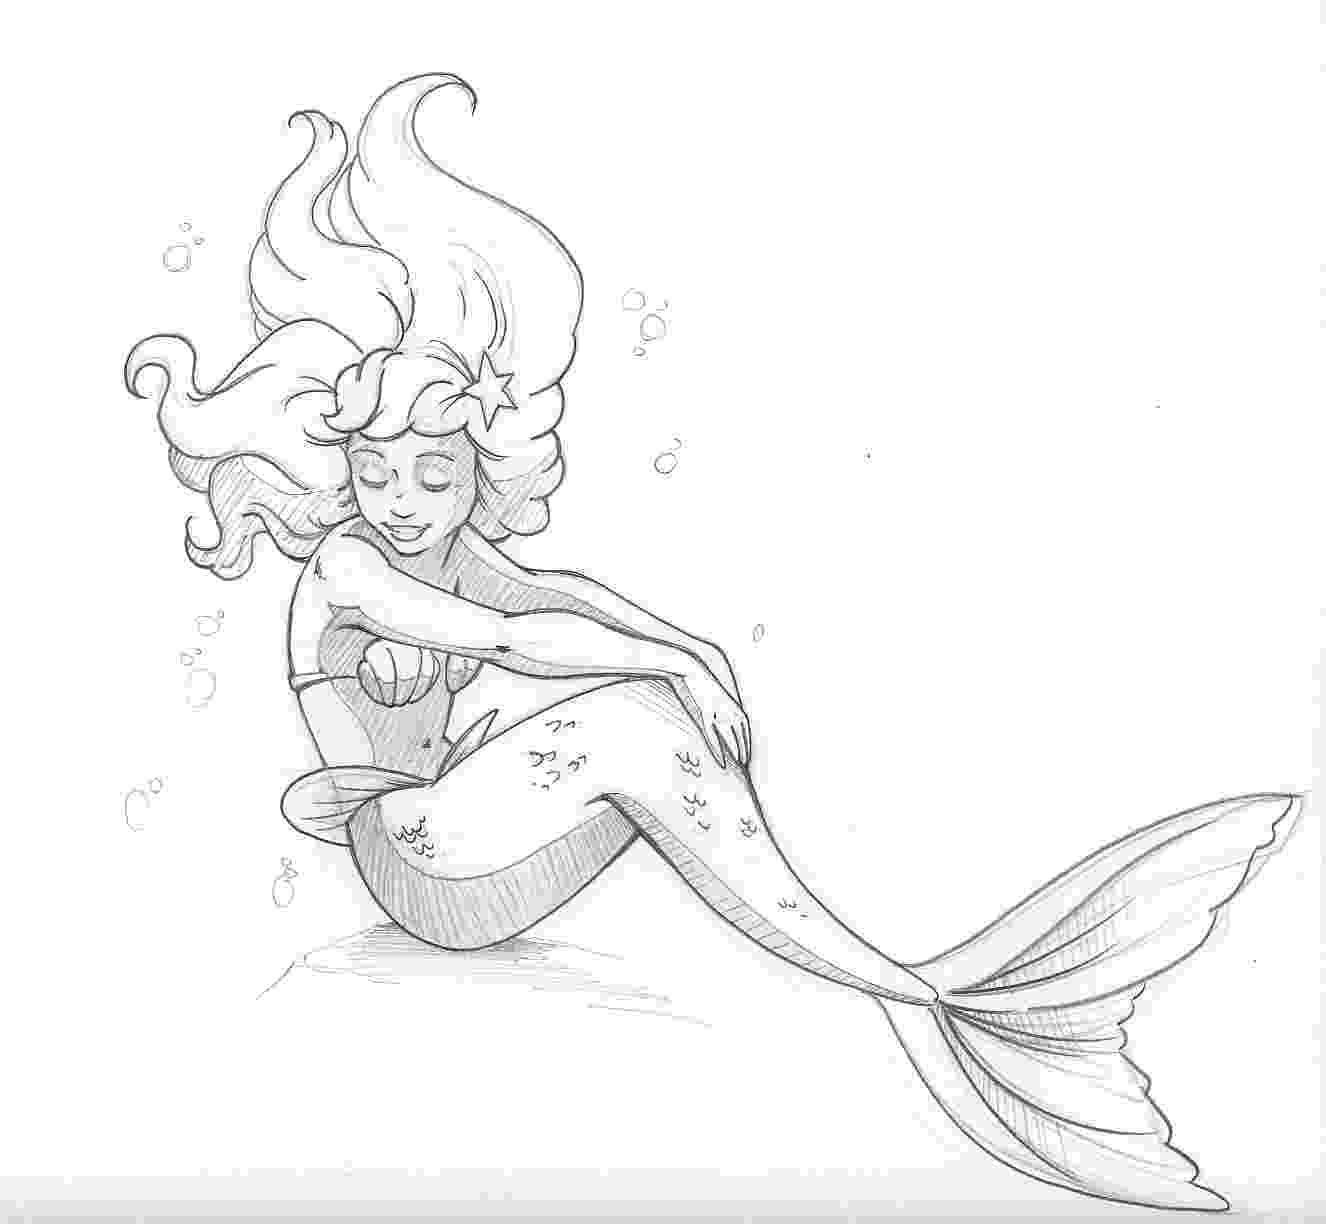 mermaids to draw jc valdez39s art and animation blog drawings mermaids draw to 